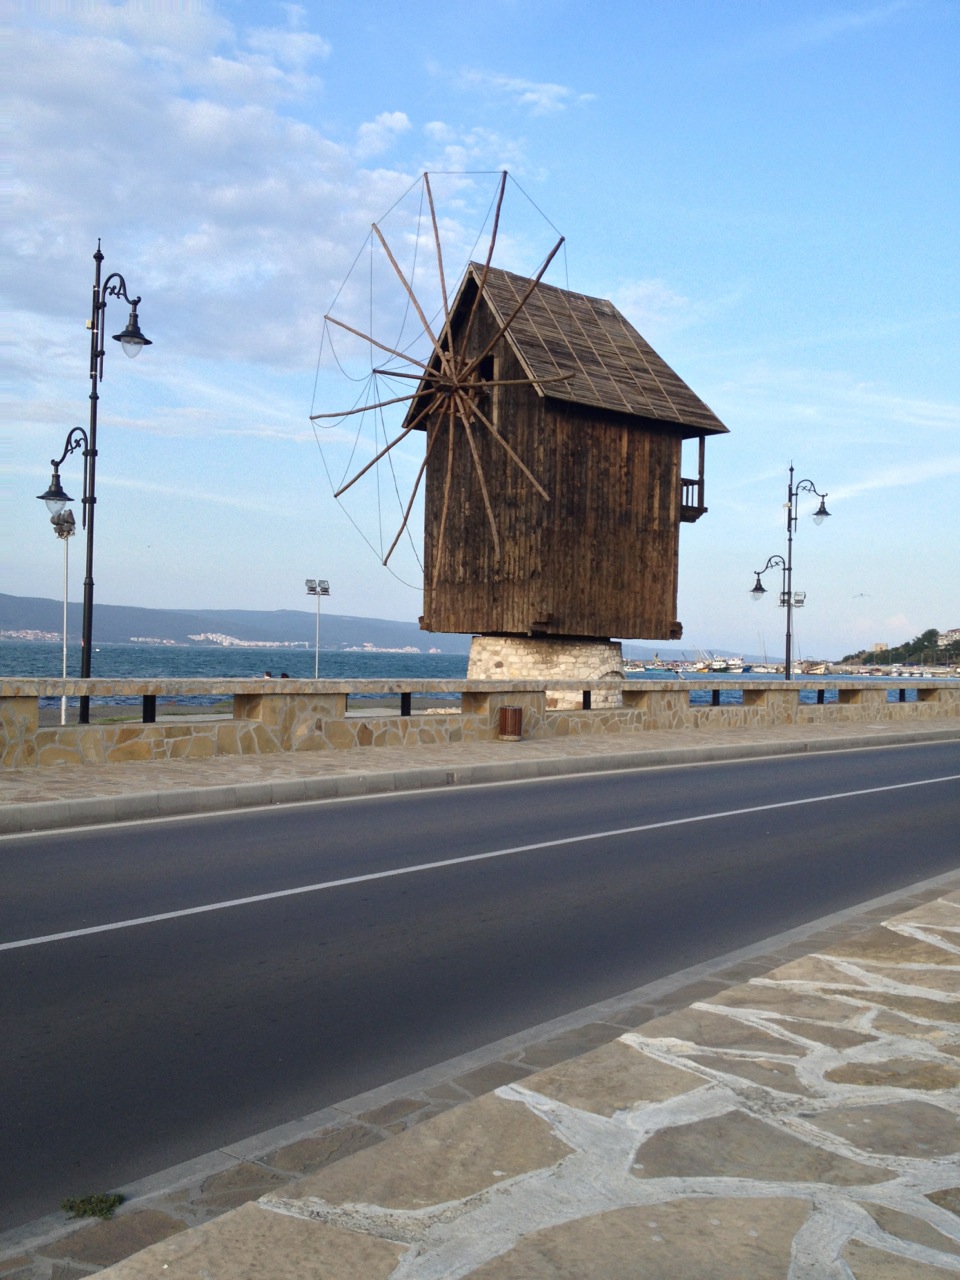 This is the real old windmill